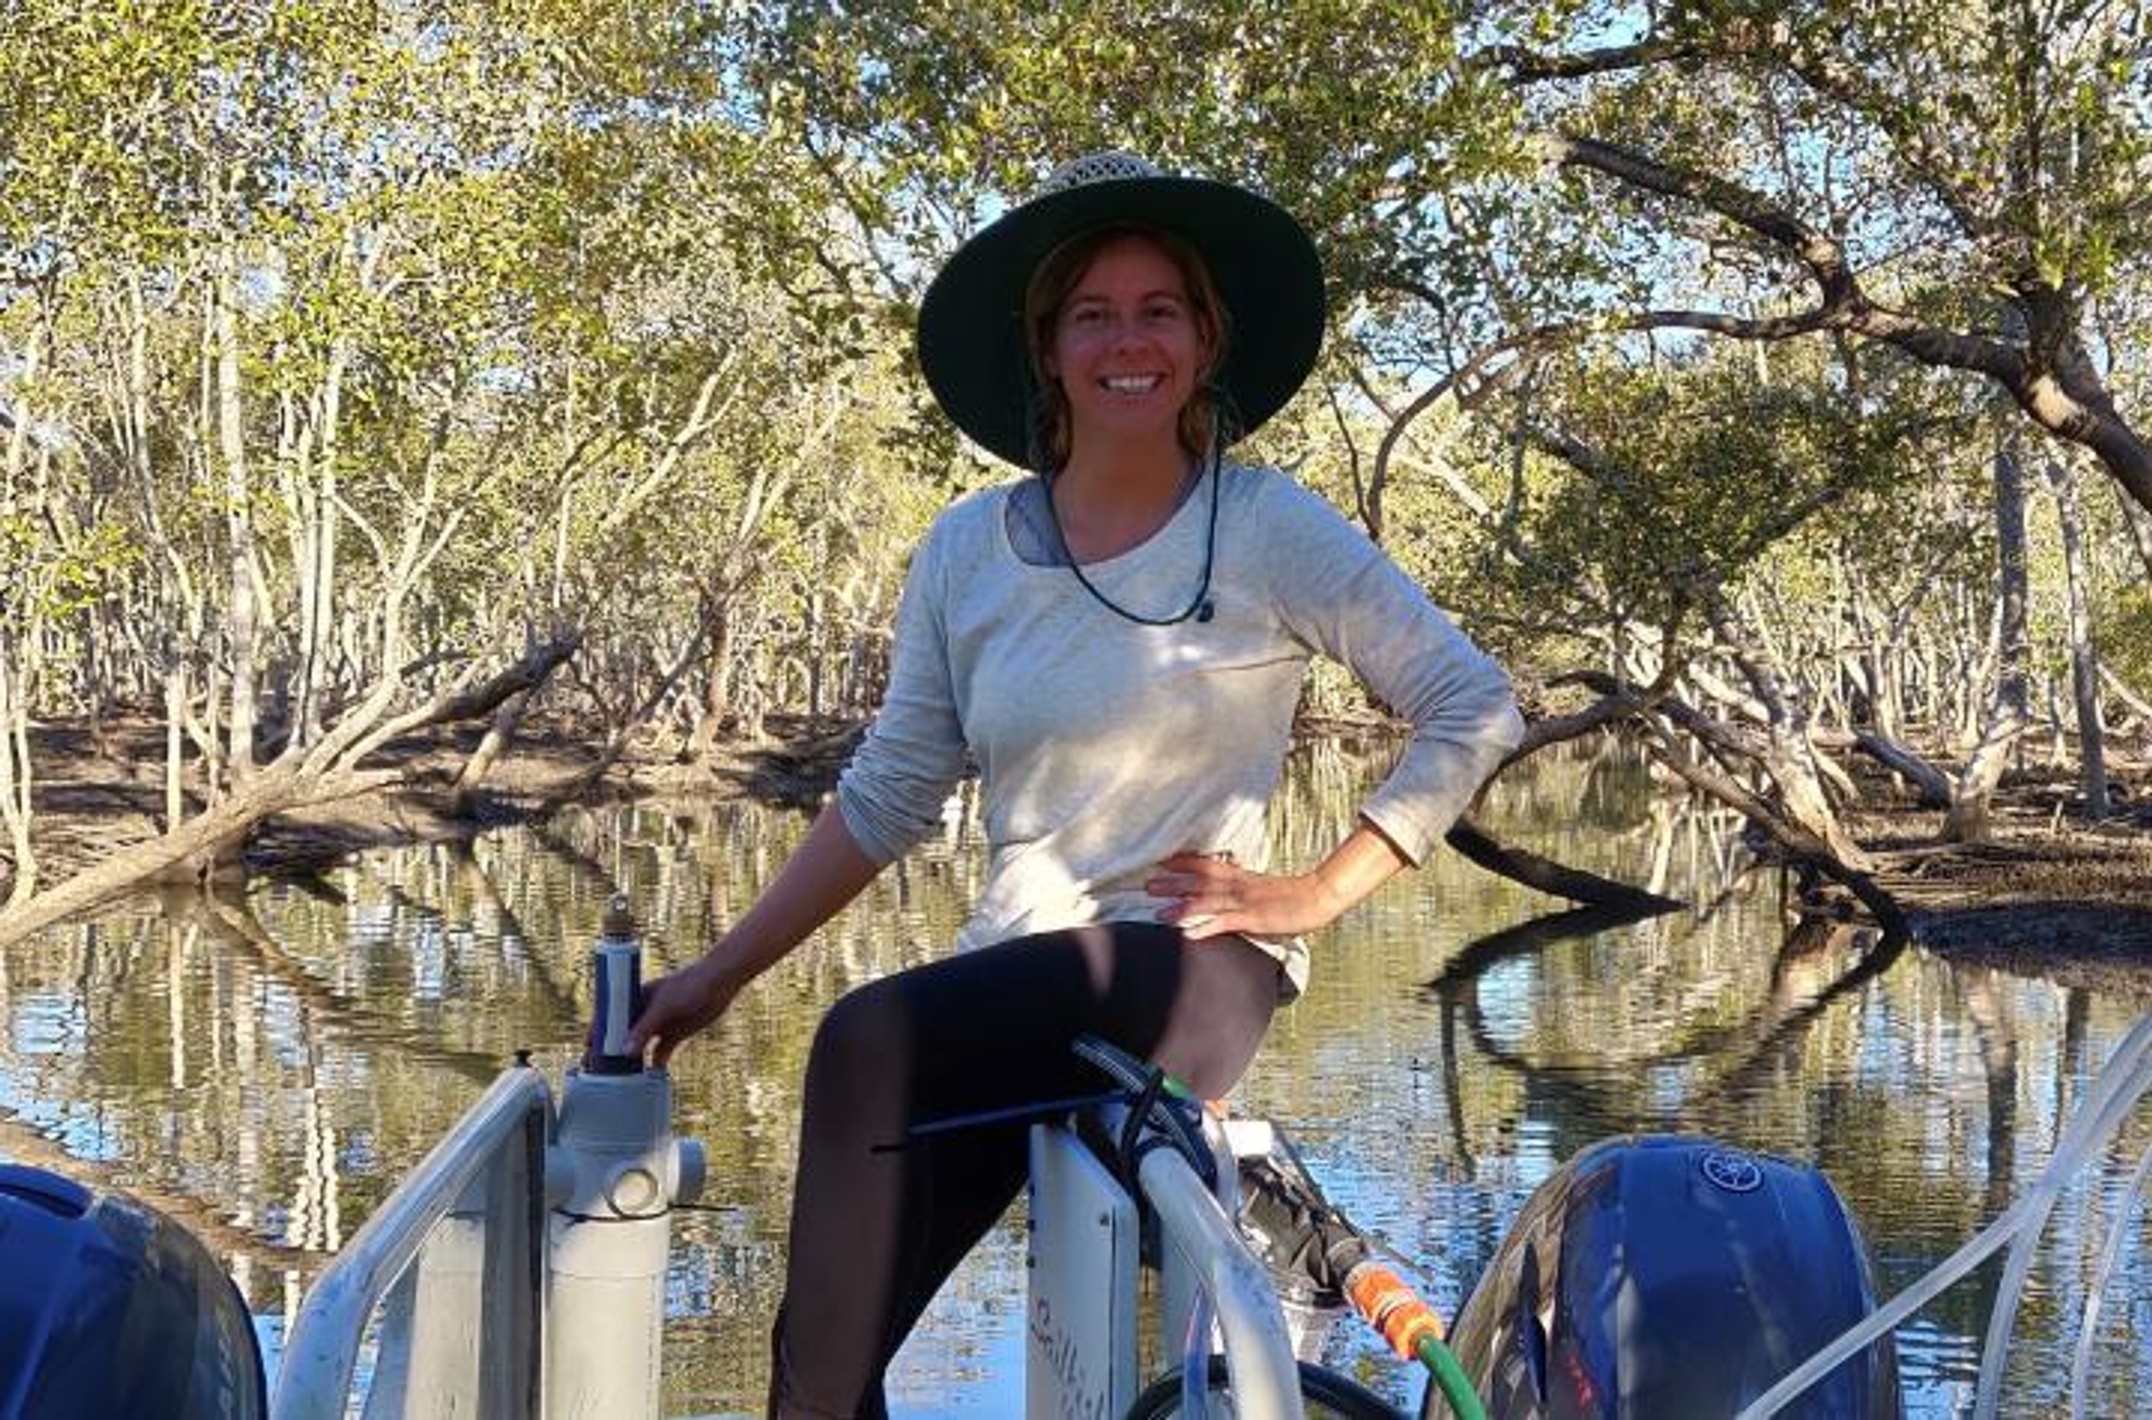 Postdoctoral Research Fellow Judith Rosentreter investigating carbon dioxide and methane emissions from mangrove-dominated estuaries and tidal creeks in Australia